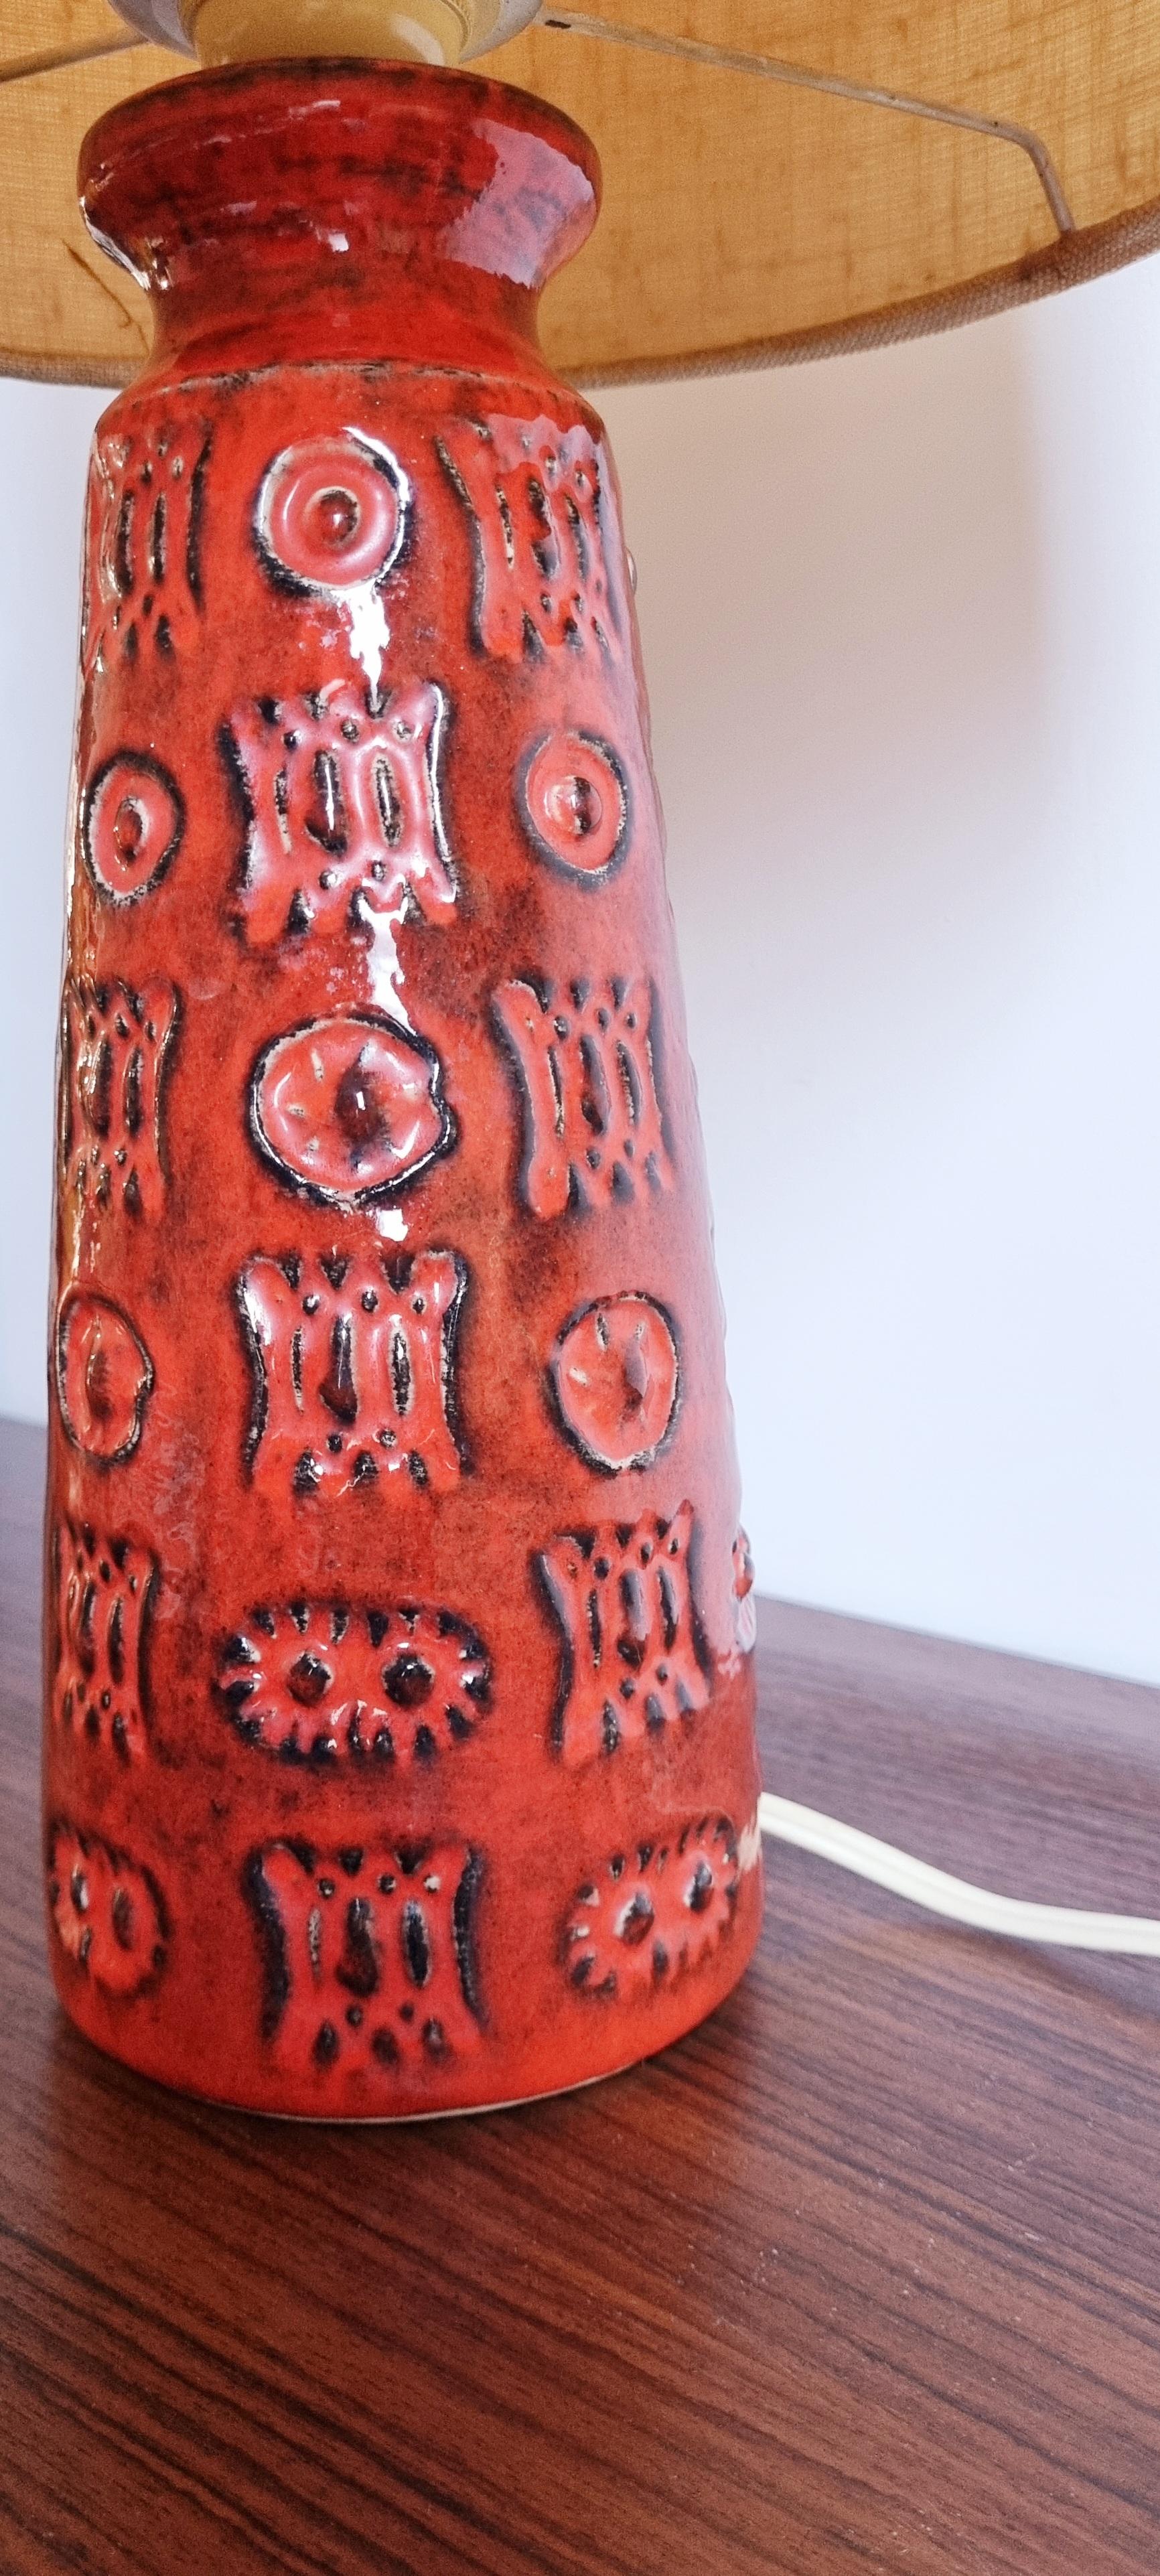 A Vintage Red SPARA KERAMIK Fat Lava Lamp with Relief Decor Design By Halidan Kutlv West German Pottery 1960s.
This vase with form number 615/25 is in excellent condition. The original shade show signs of age and usage especially on the inside.